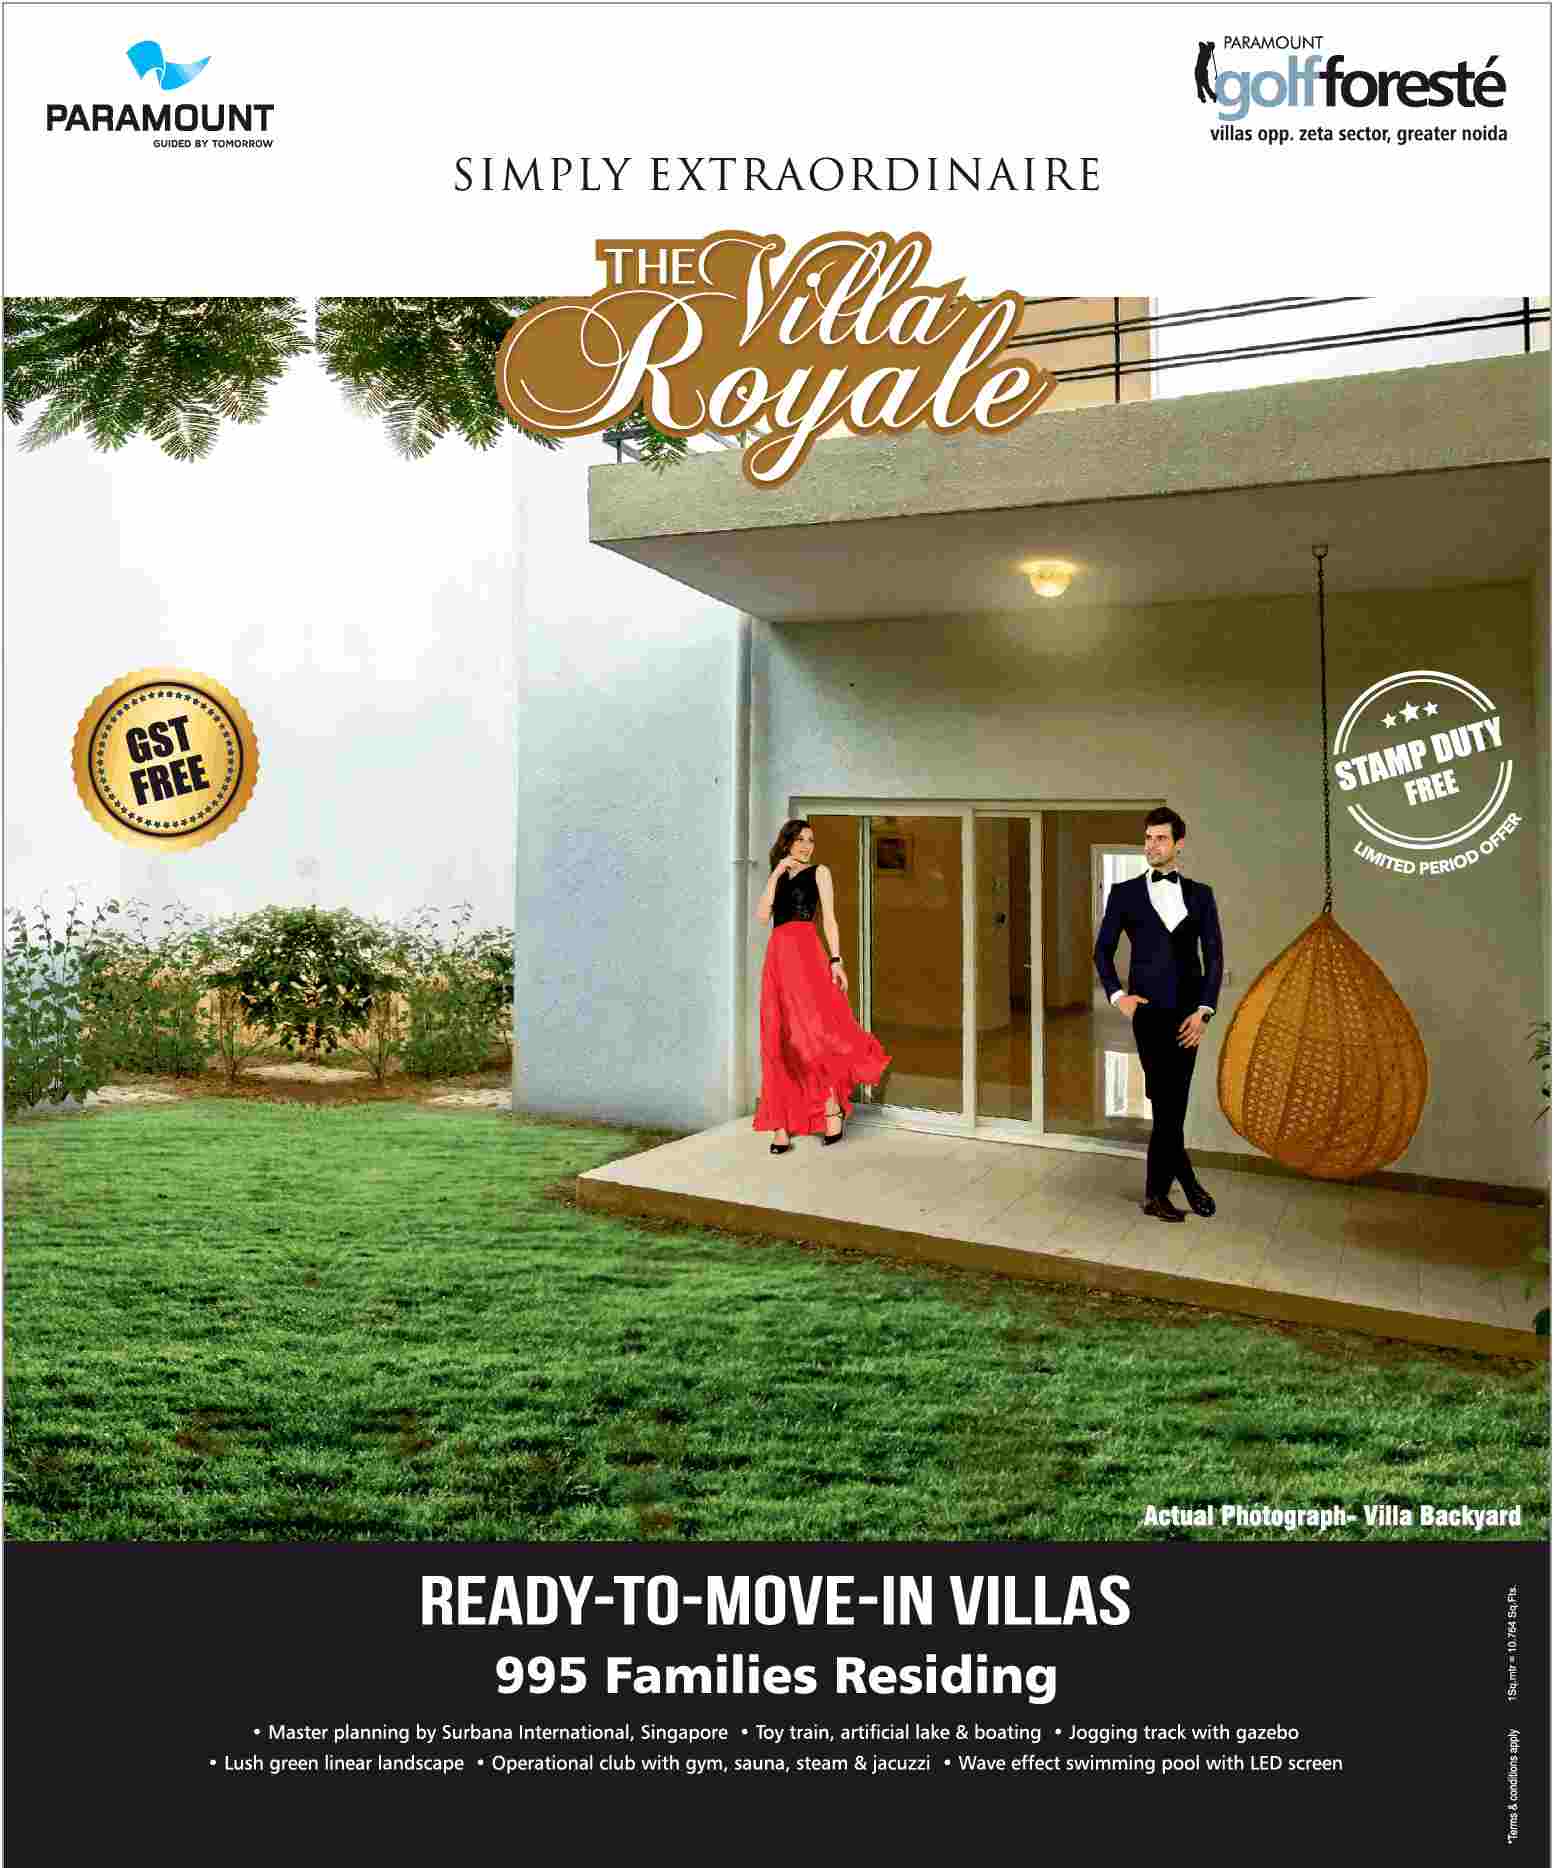 Reside in simply extraordinaire villas at Paramount Golf Foreste in Greater Noida Update